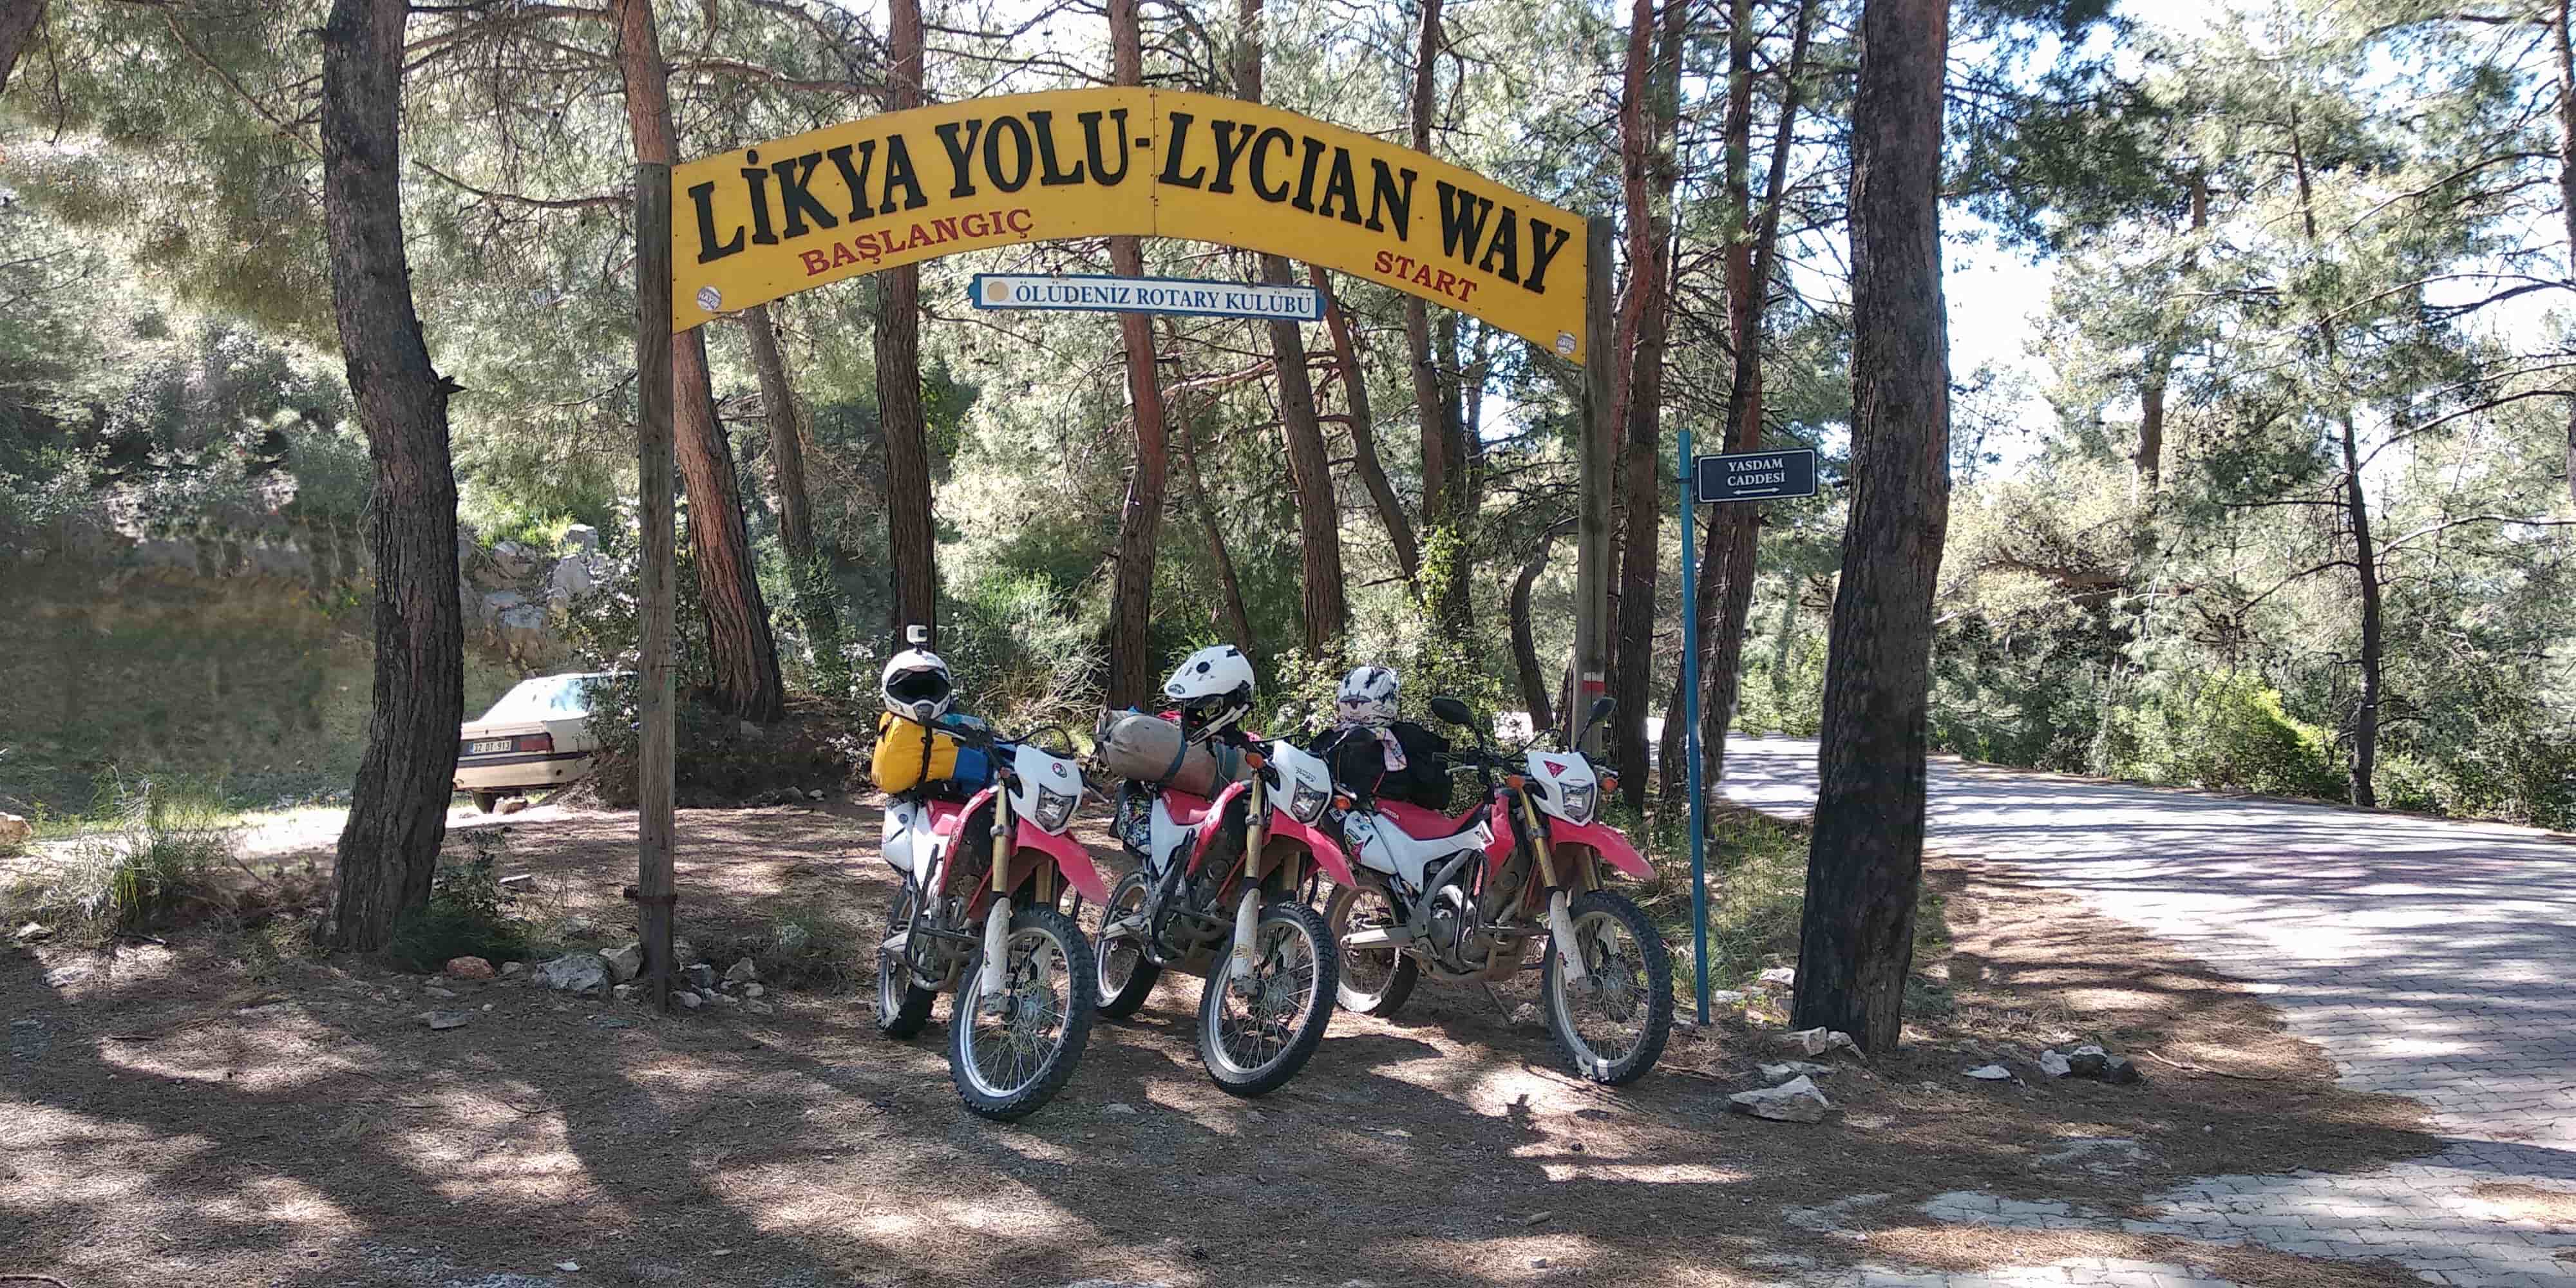 The Lycian Way start point